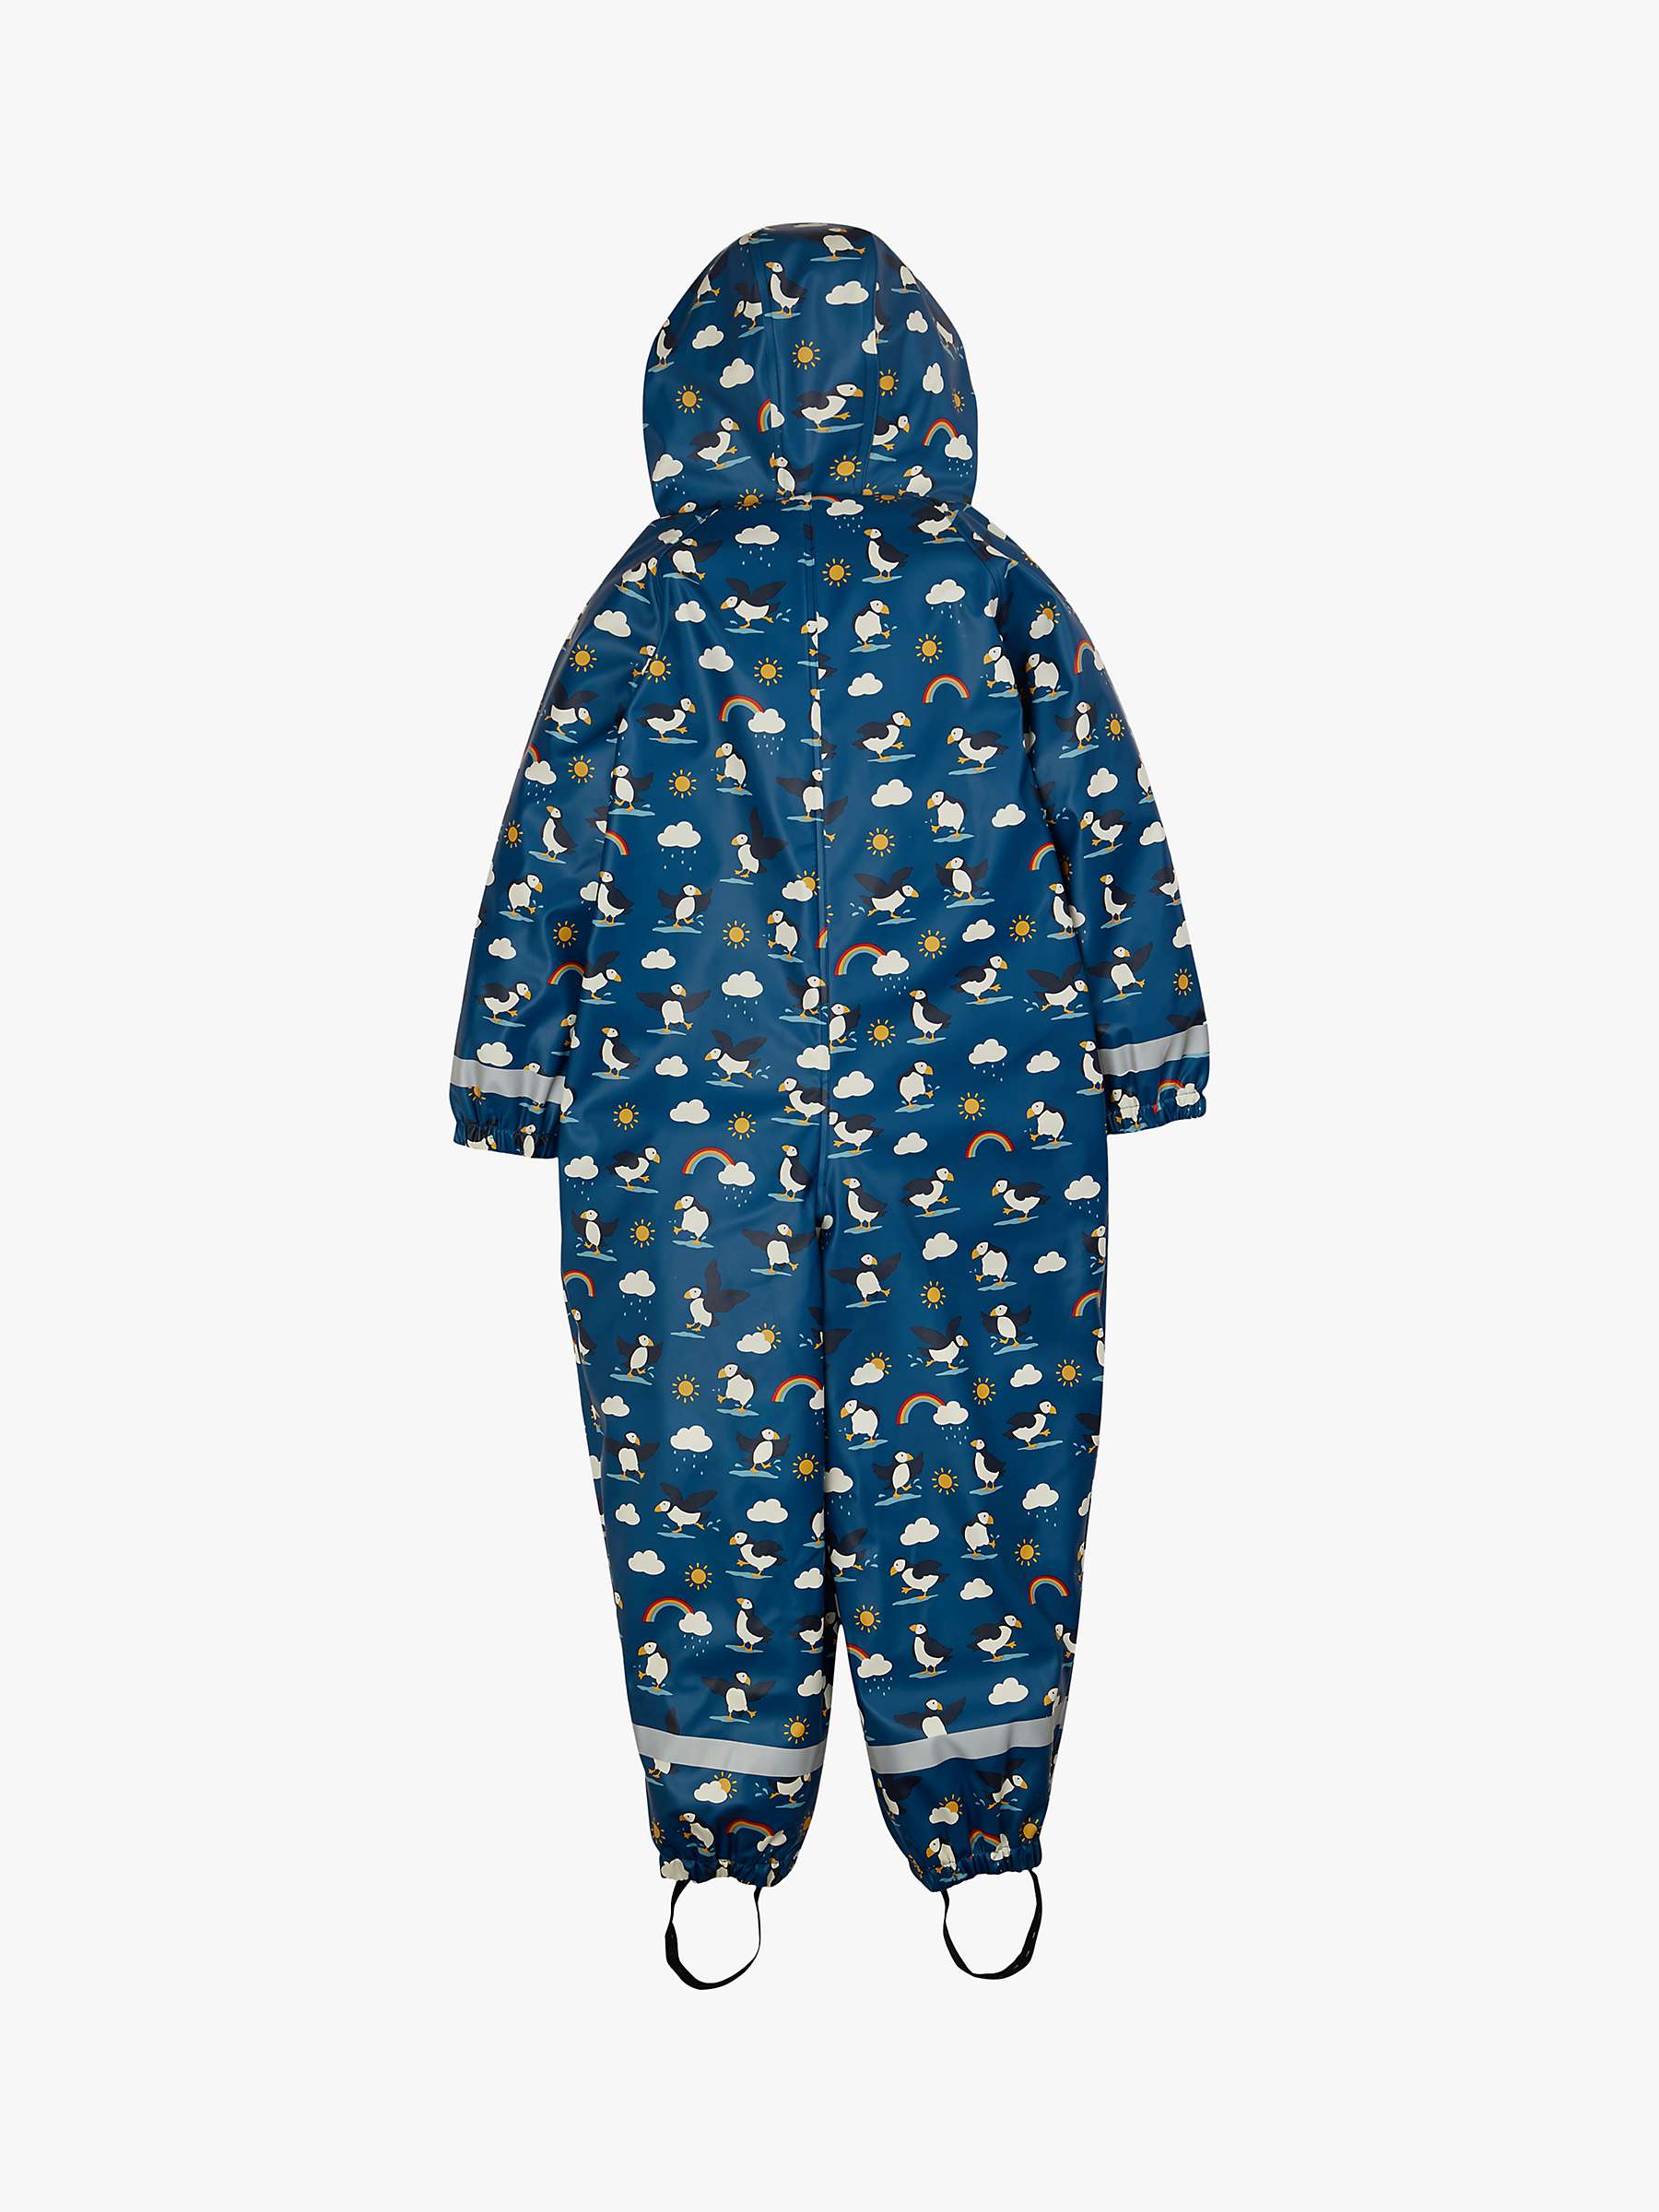 Buy Frugi Baby Puffin Puddle Buster All-in-One Waterproof Suit, Blue/Multi Online at johnlewis.com